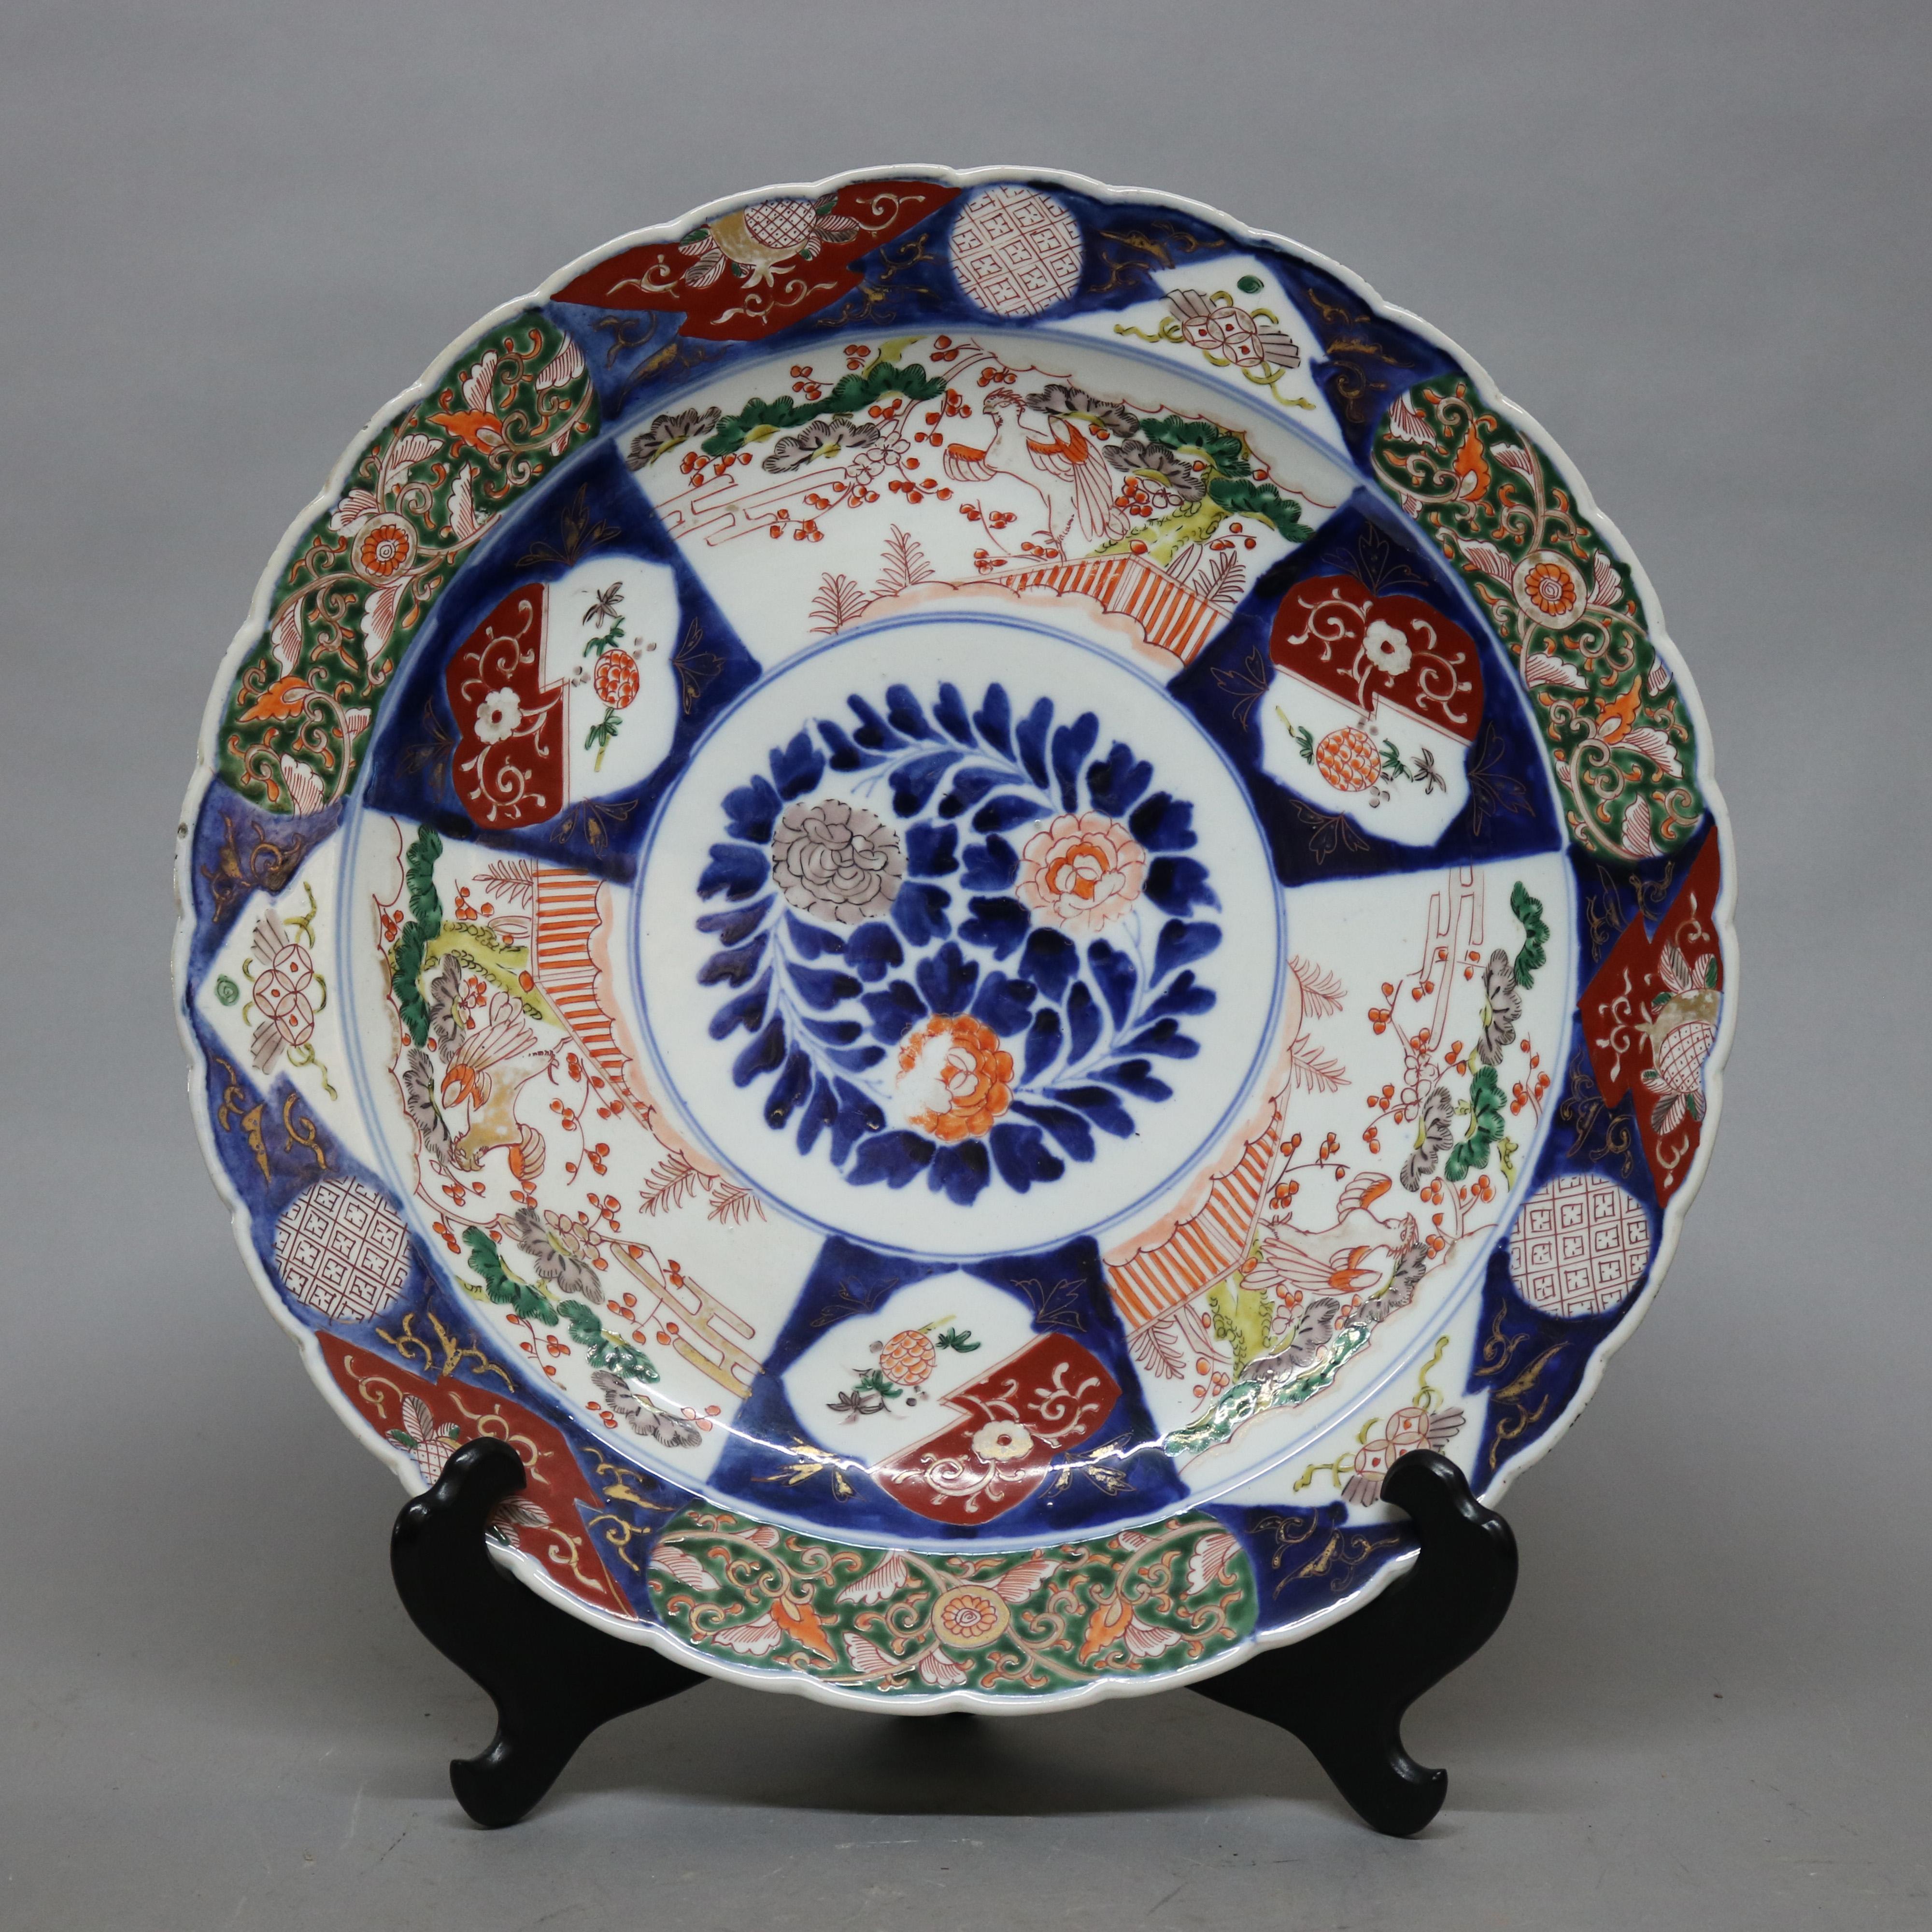 An antique Japanese Imari porcelain charger offers scalloped rim with central floral medallion and paneled borders with garden scenes having birds, gilt highlights throughout, en verso blue decoration, circa 1900

Measures: 2